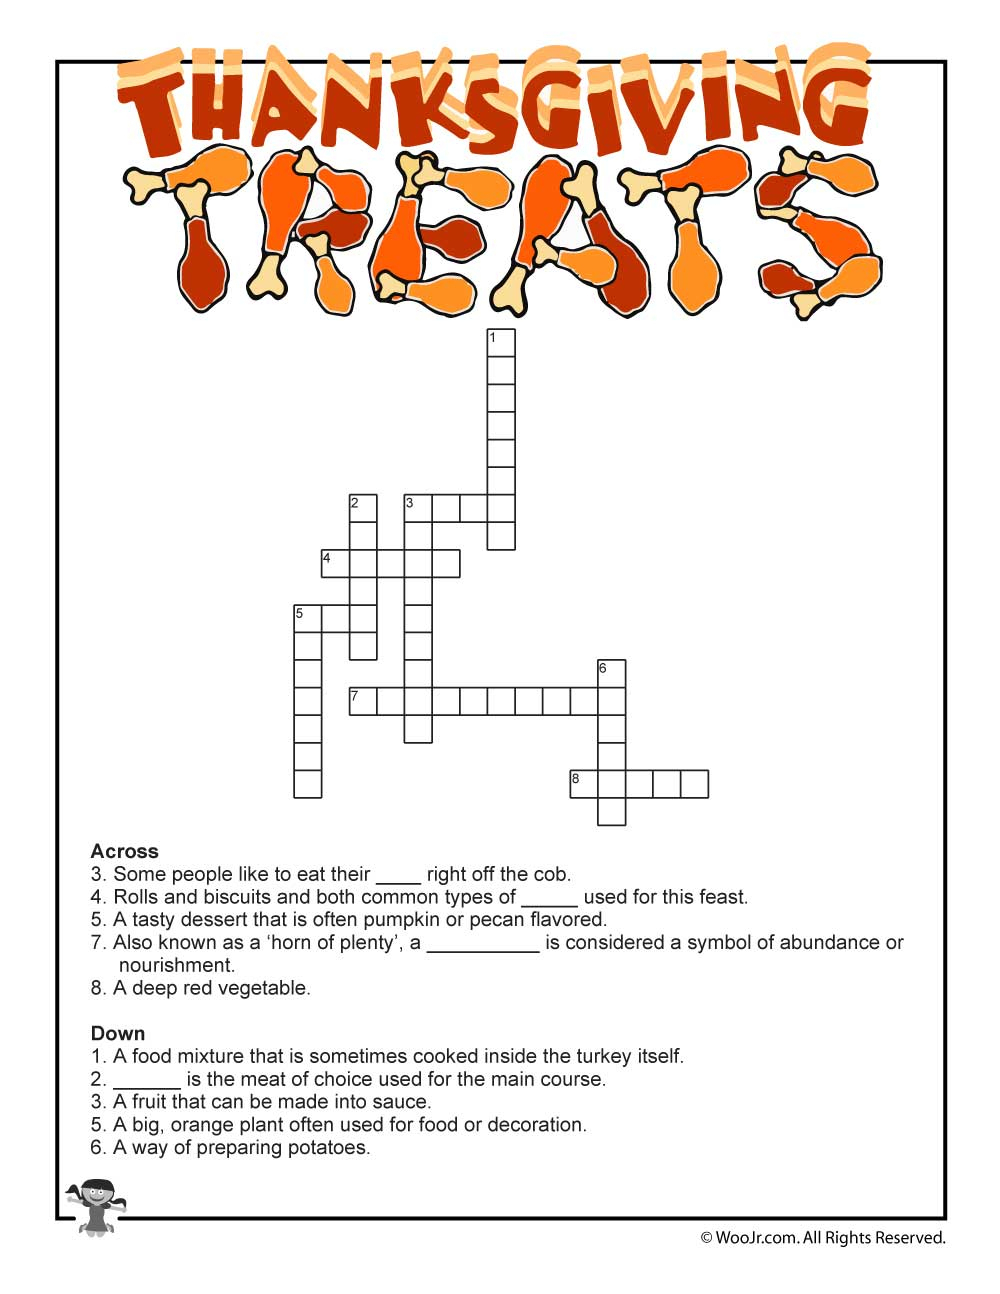 Thanksgiving Crossword Puzzles For Adults Printable